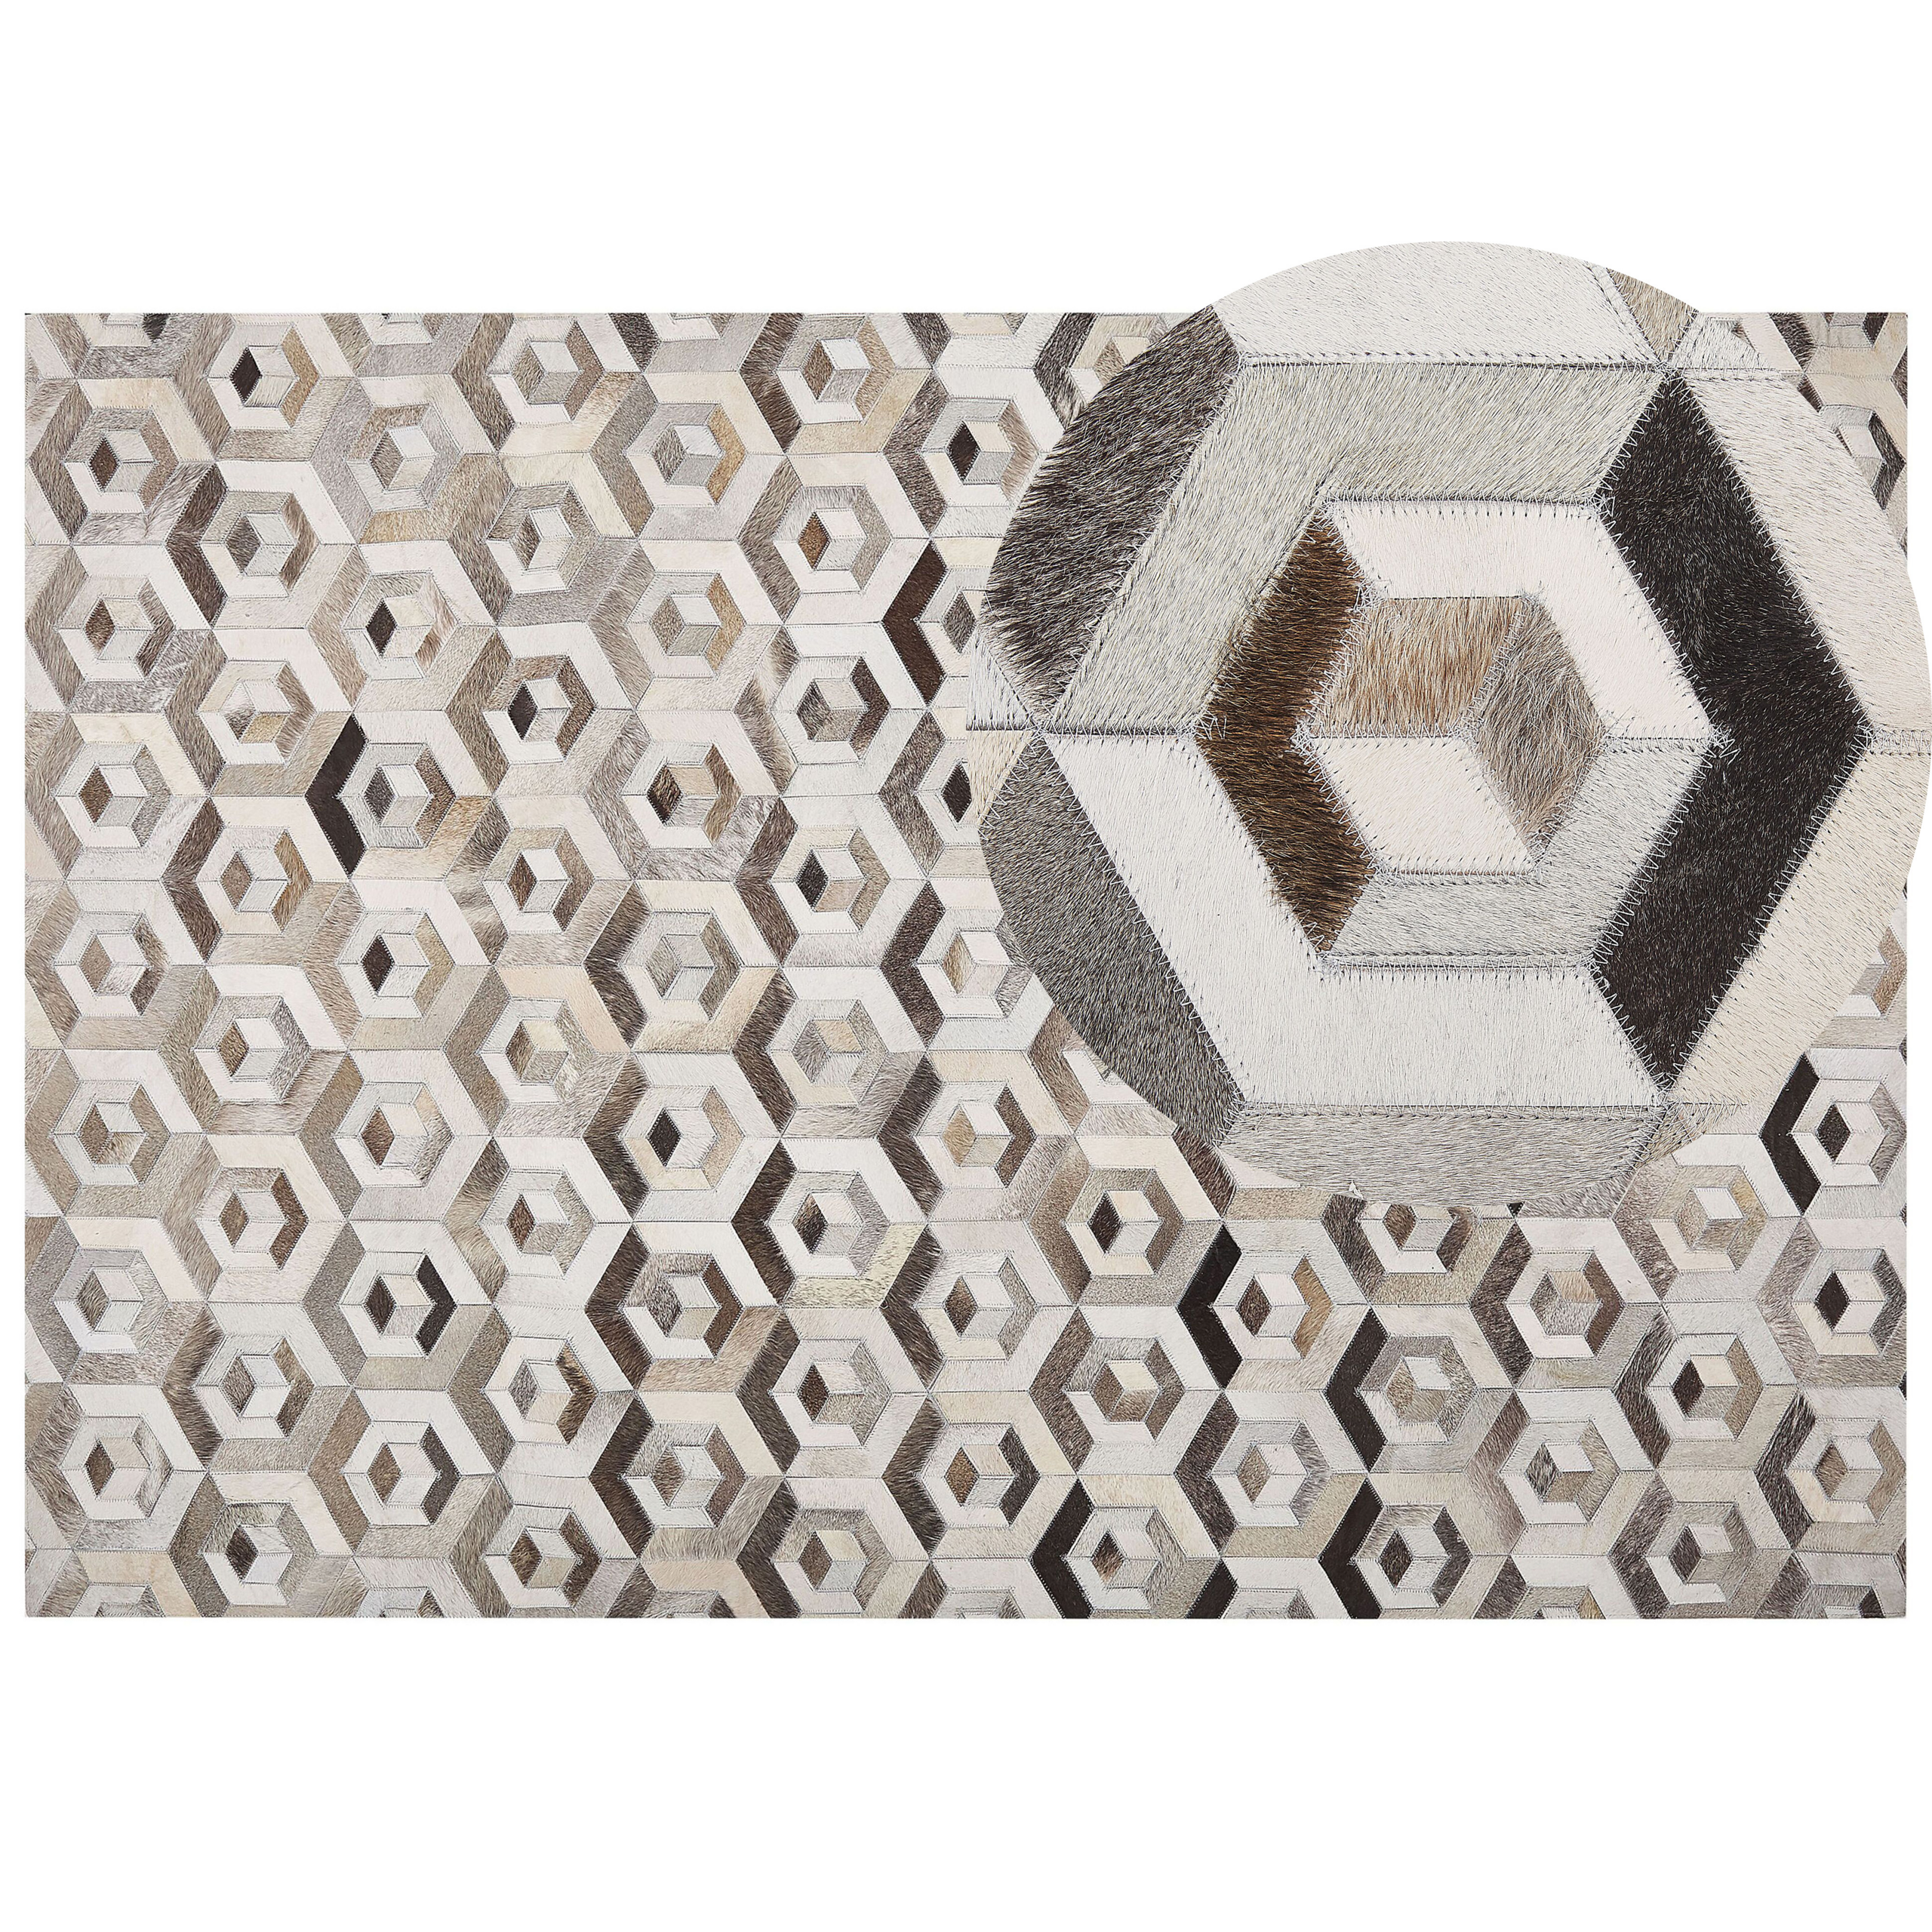 Beliani Rectangular Area Rug Beige and Brown Cowhide Leather 160 x 230 cm Patchwork Geometric Pattern Retro